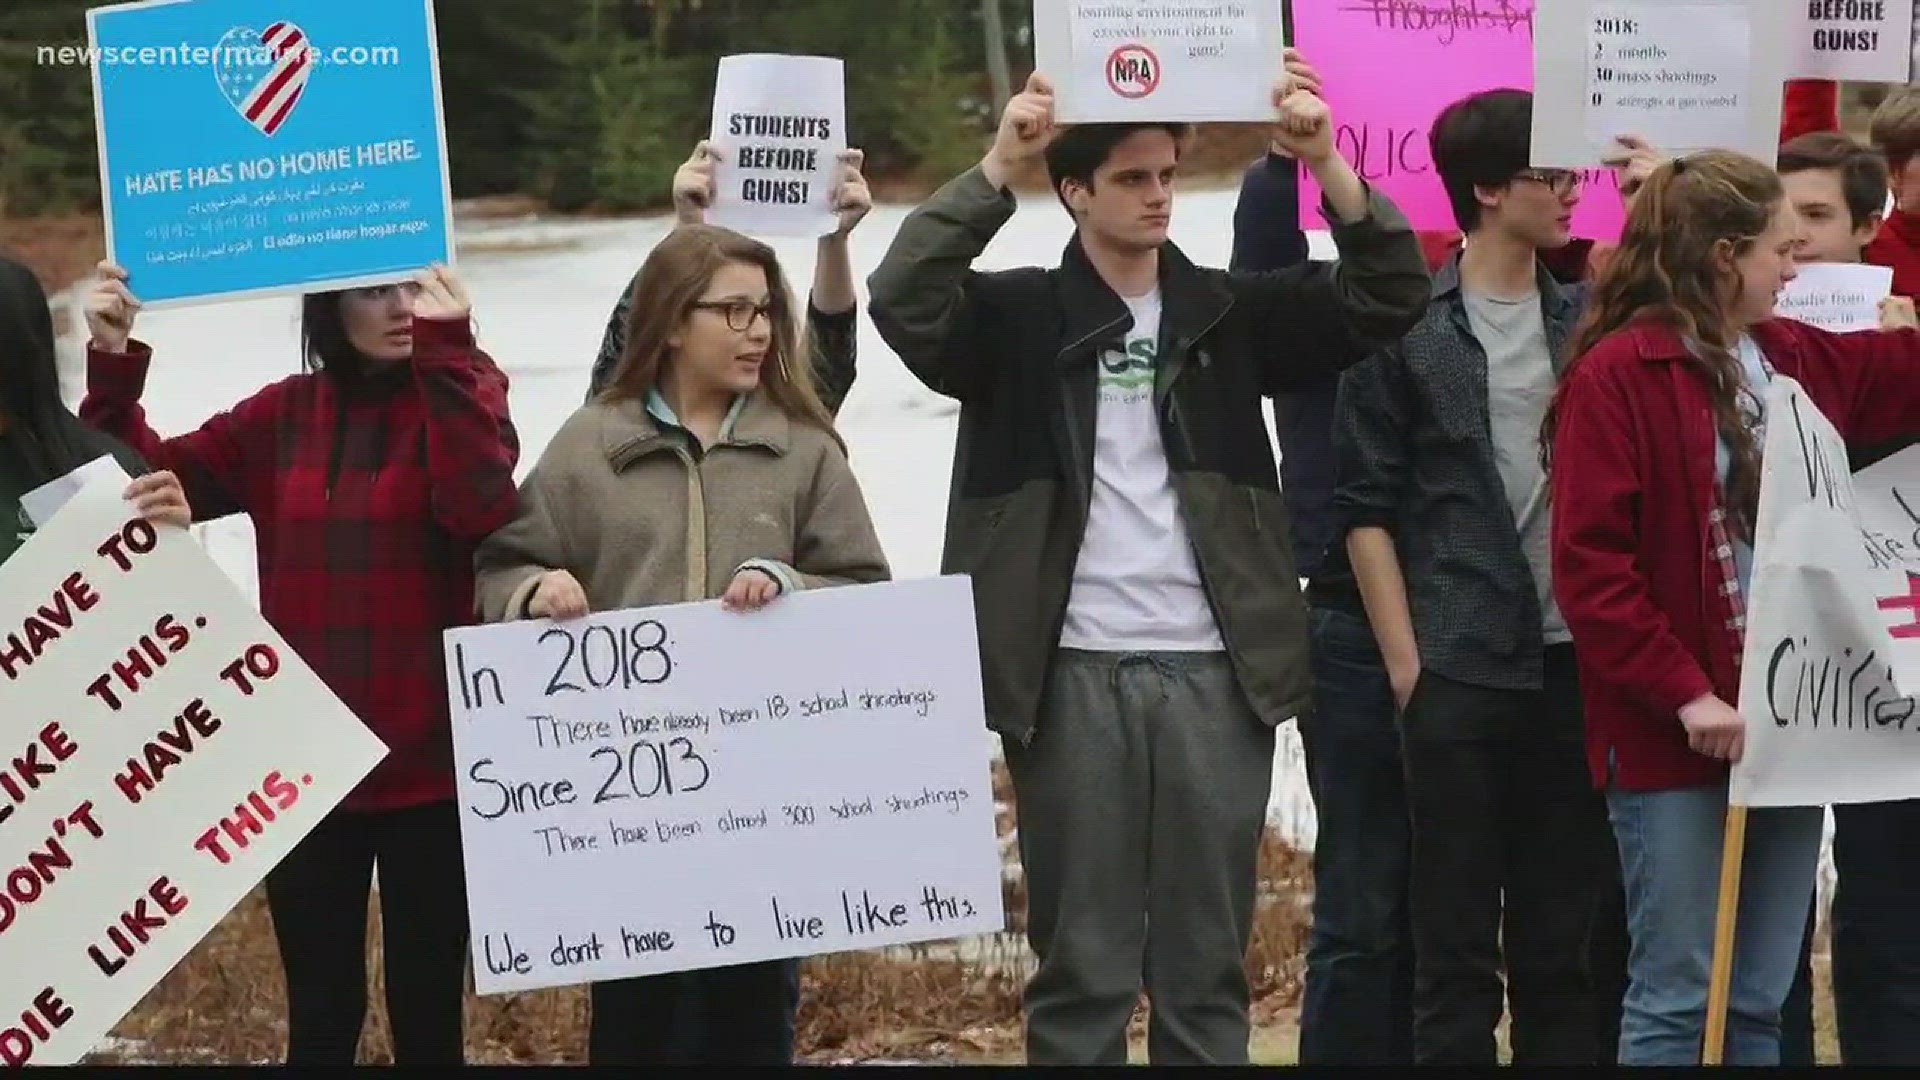 MDI high schoolers protest after Florida shooting